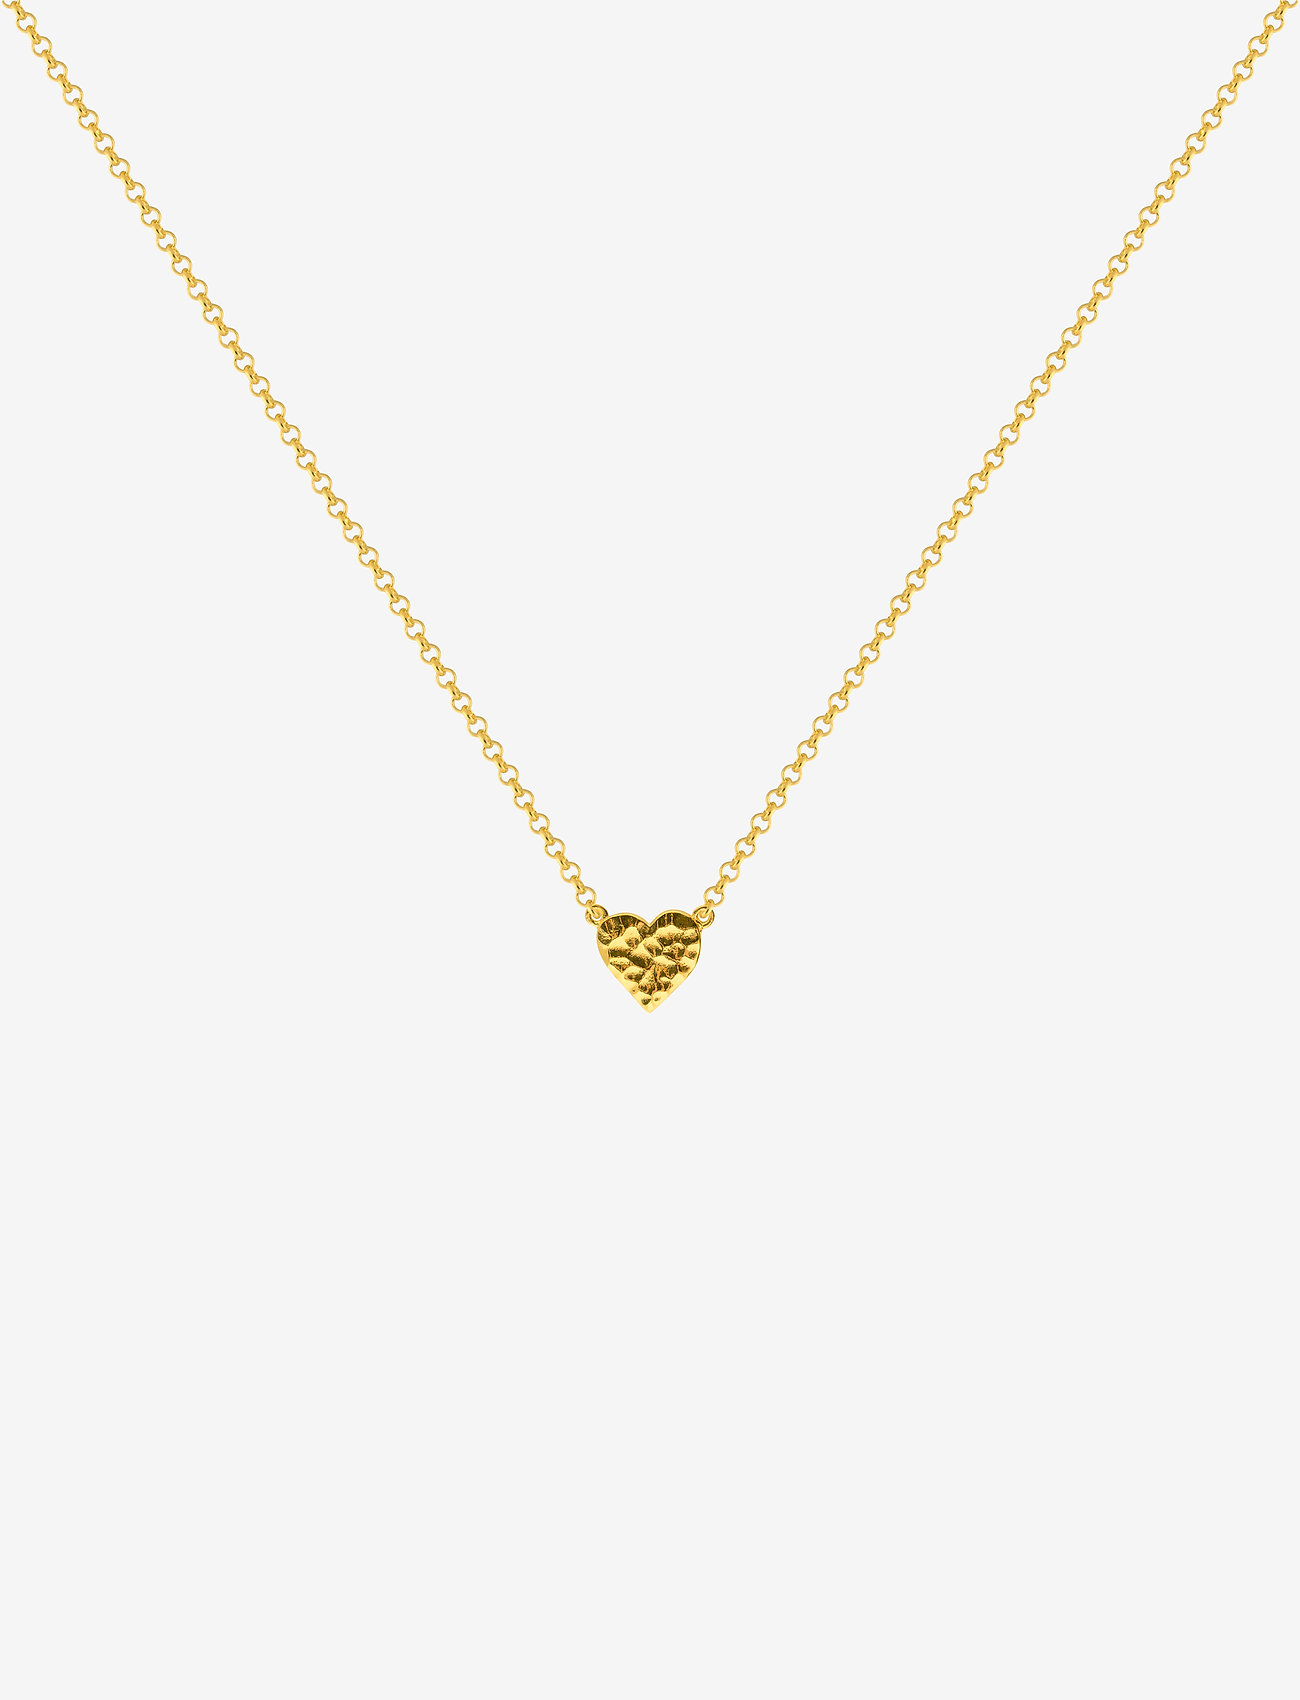 SOPHIE by SOPHIE - Wildheart necklace - peoriided outlet-hindadega - gold - 0